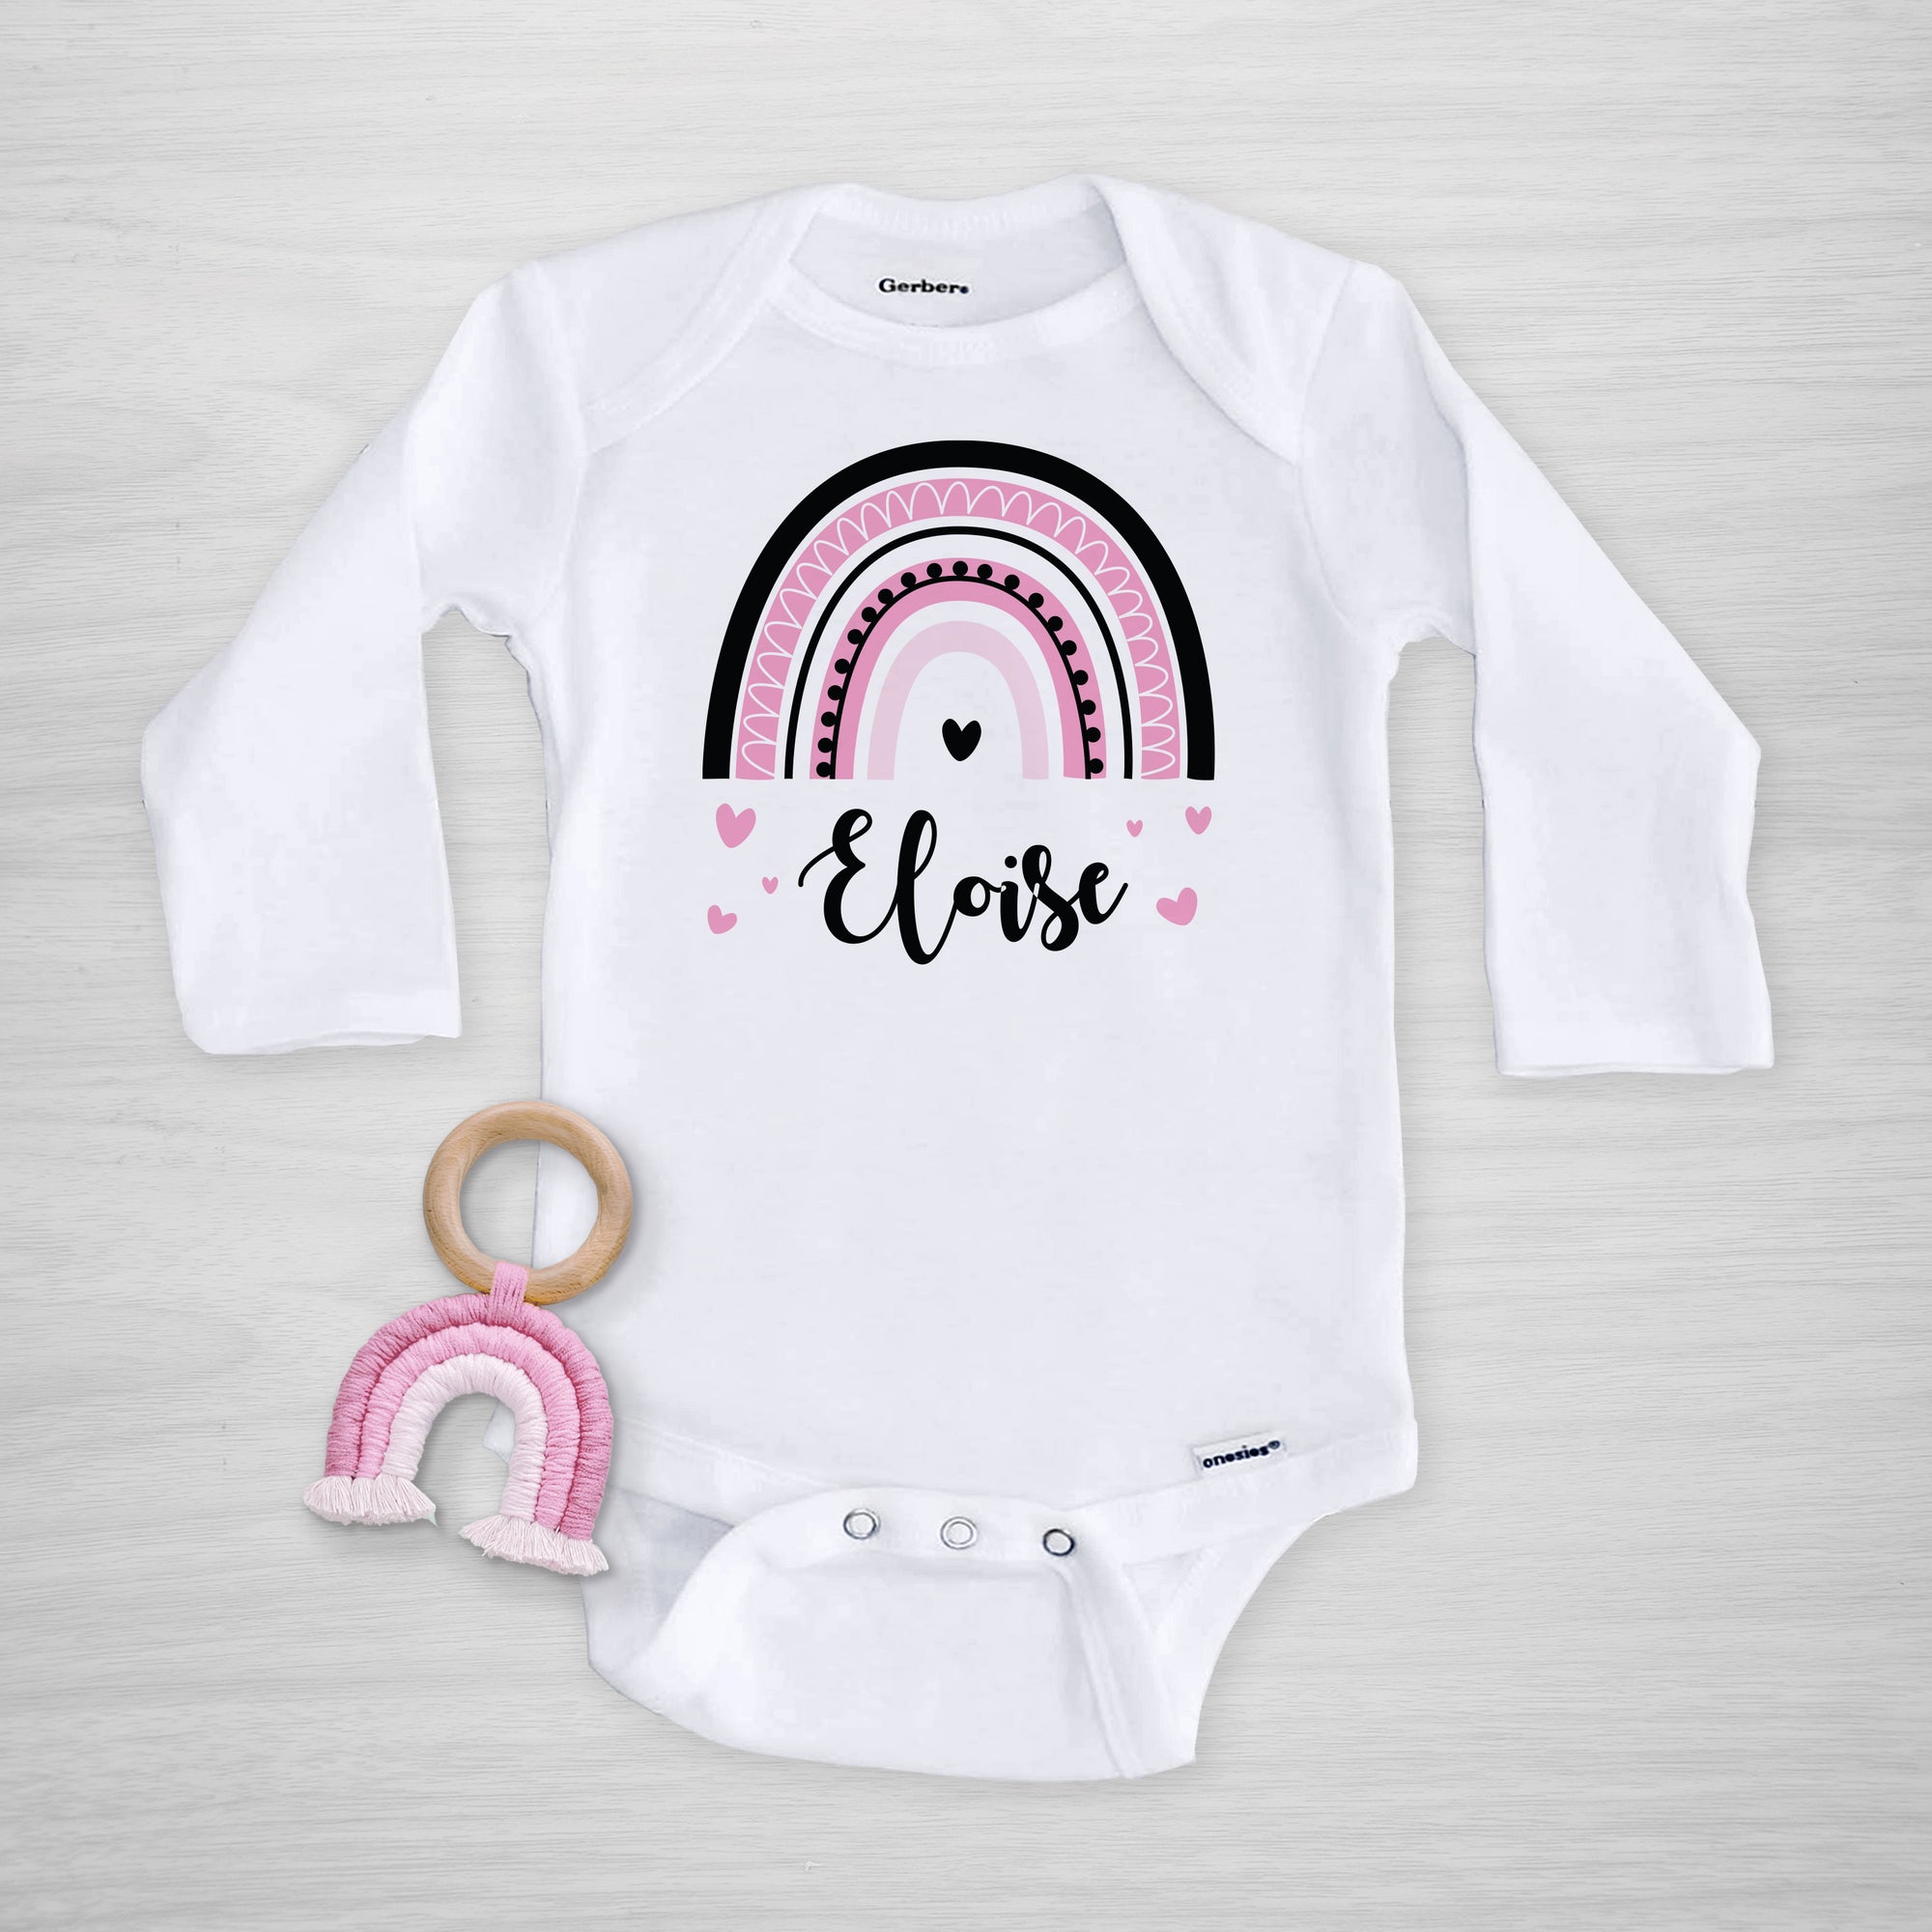 Bold Rainbow Personalized gerber onesie® from Pipsy.com, long sleeved